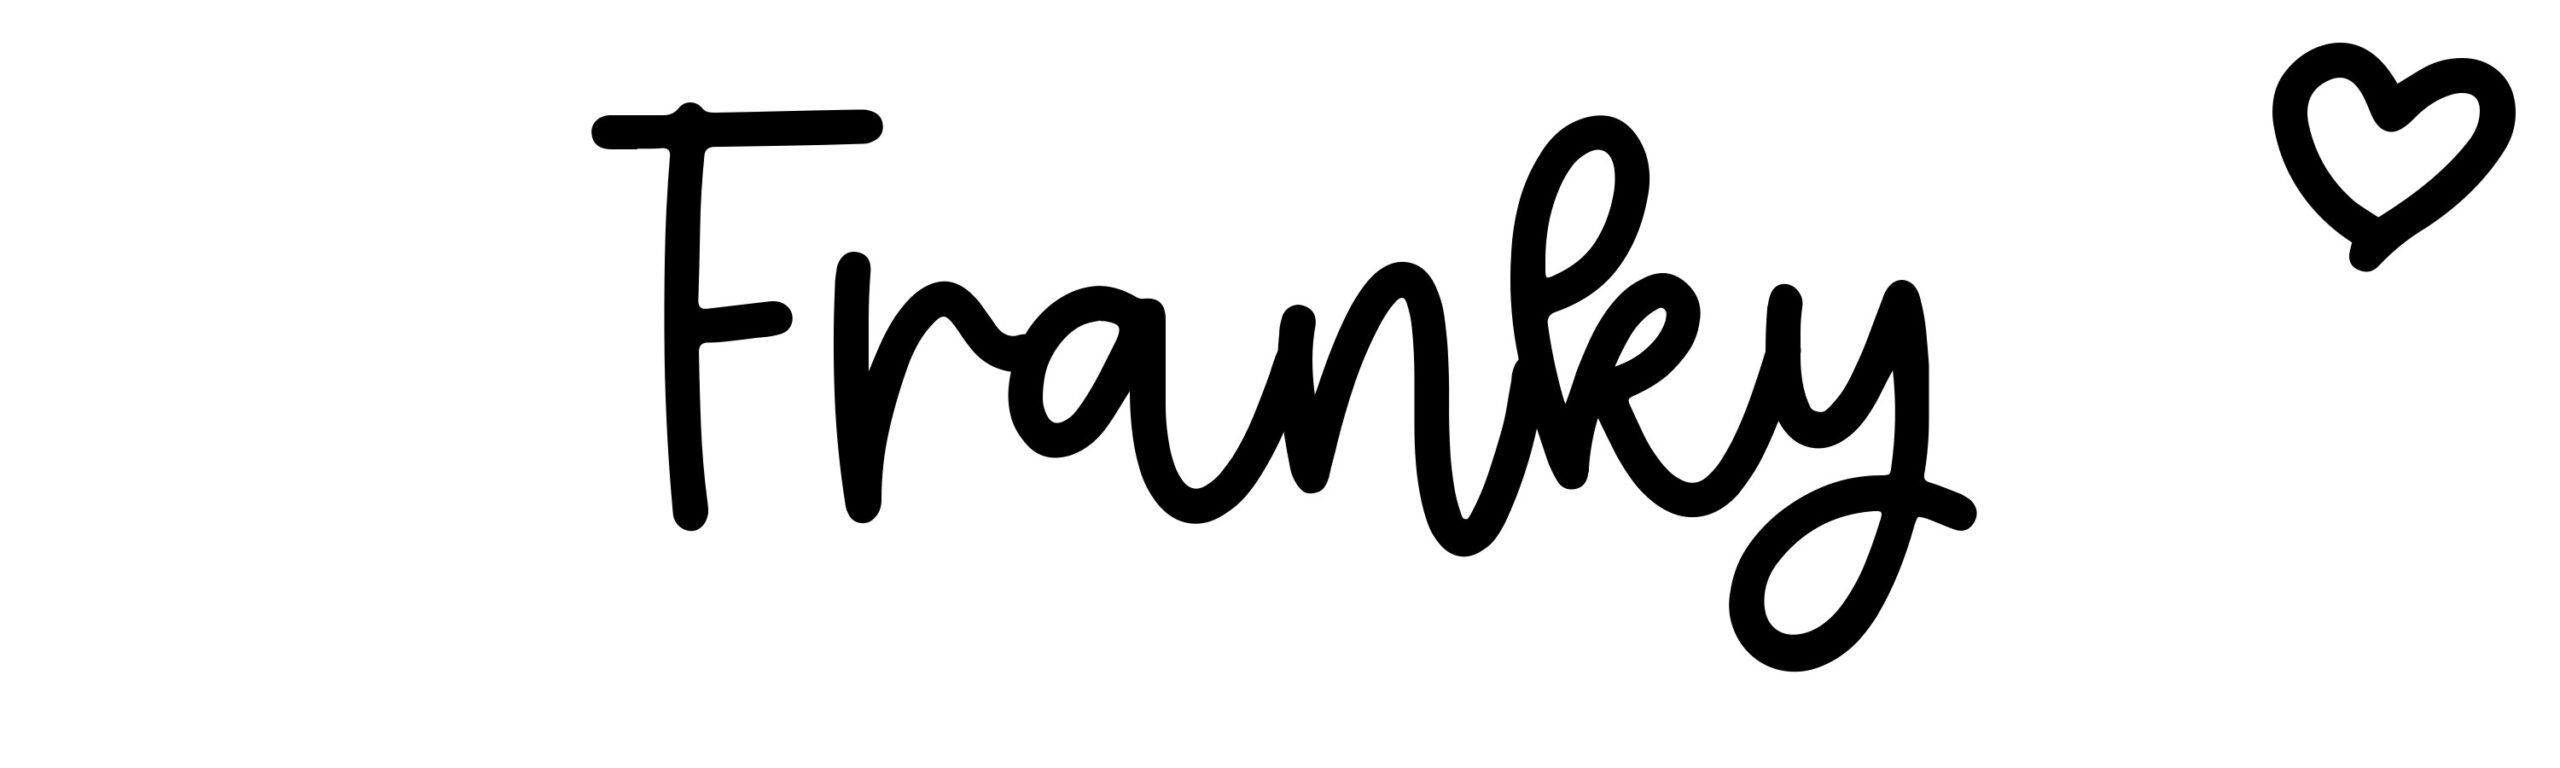 Franky - Name meaning, origin, variations and more